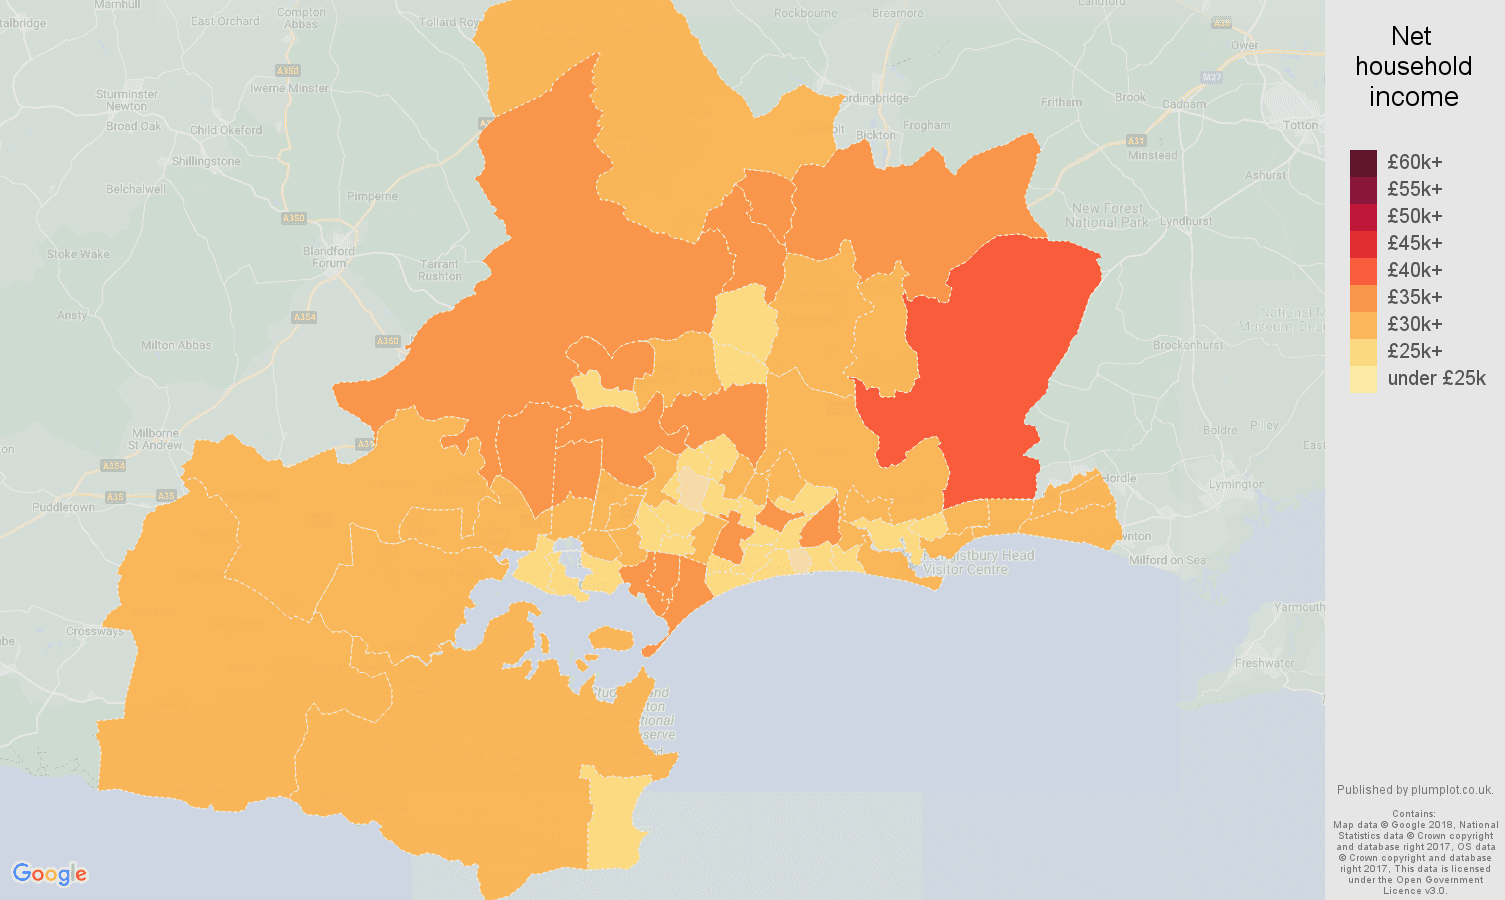 Bournemouth net household income map